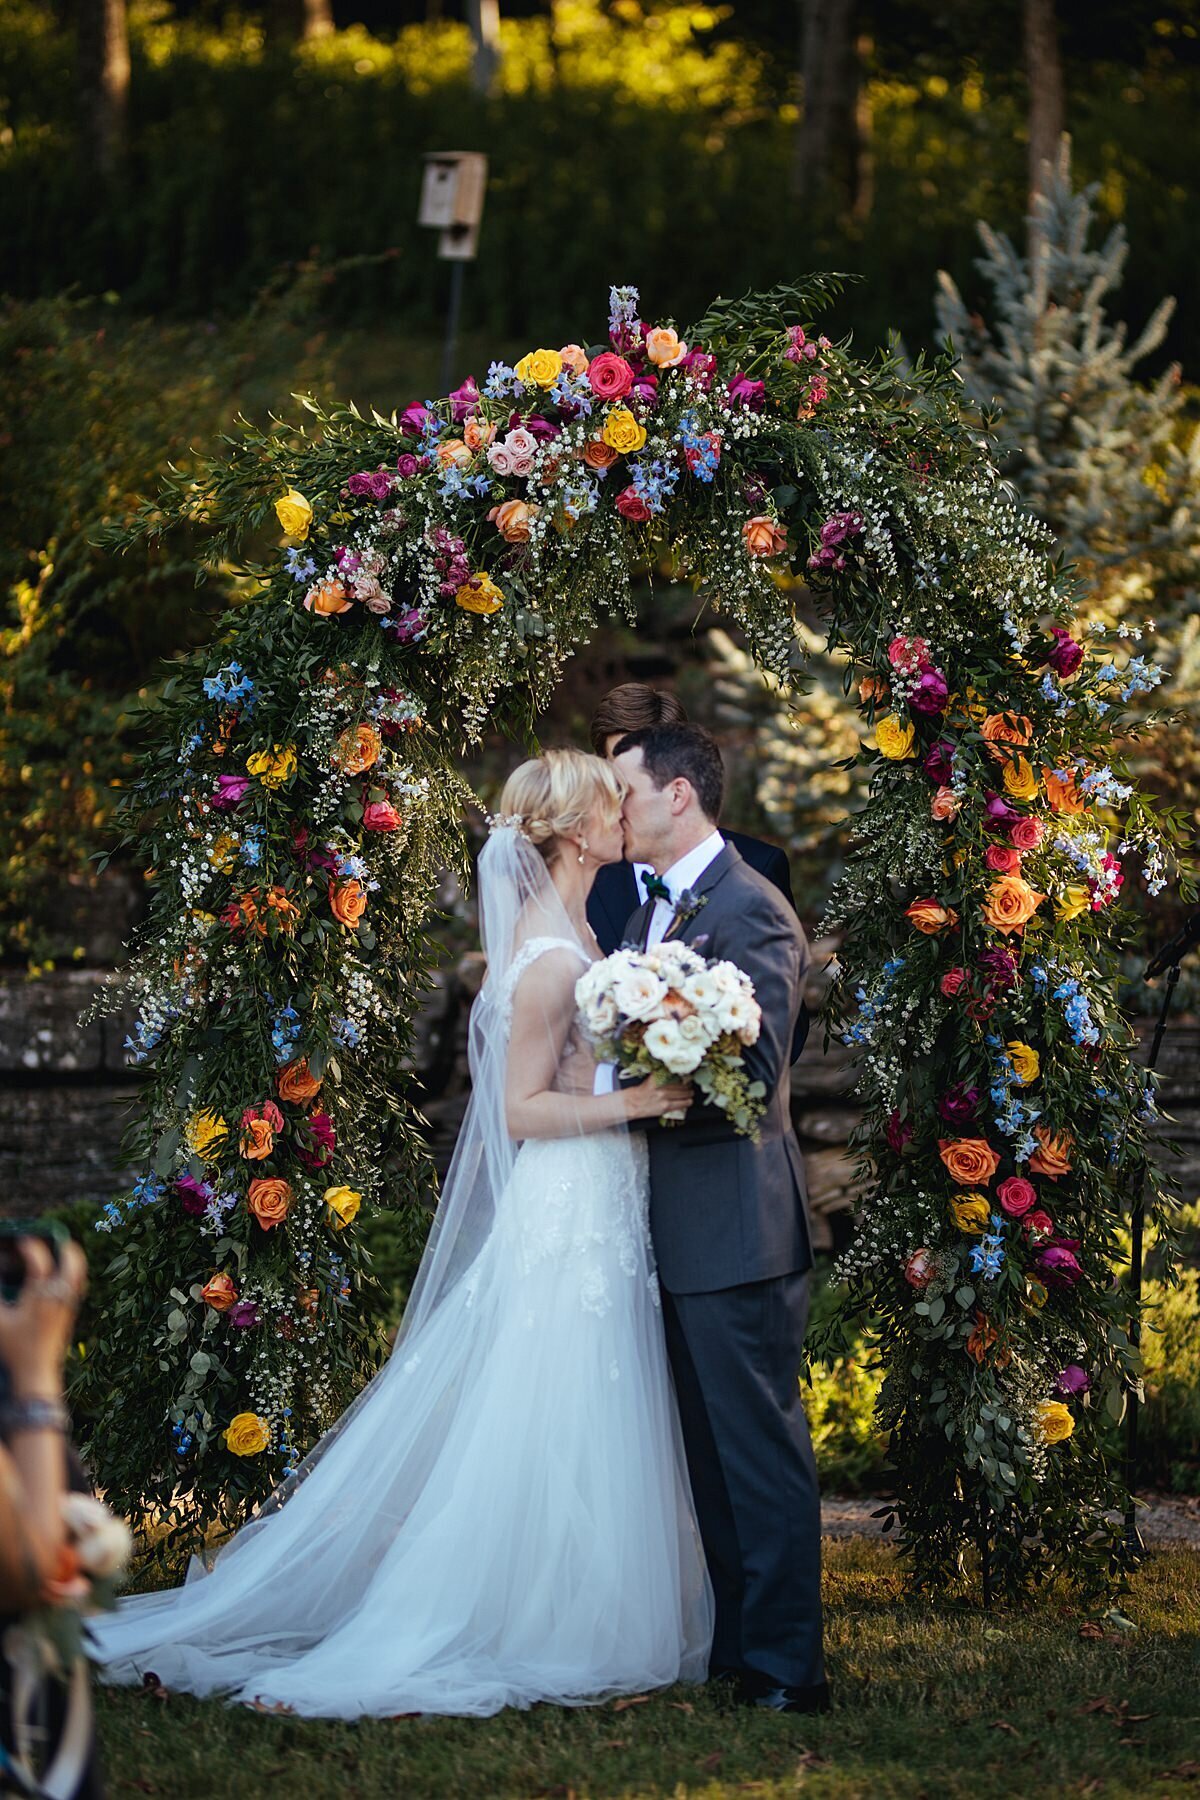 The bride, in a long sleeveless lace gown with a long sheer veil, holding a white, ivory, peach and blush bouquet kisses the groom in a charcoal gray tuxedo in front of a lush wedding arbor covered in greenery, red, yellow, orange, hot pink, blue, and purple flowers at Cheekwood Botanical Gardens